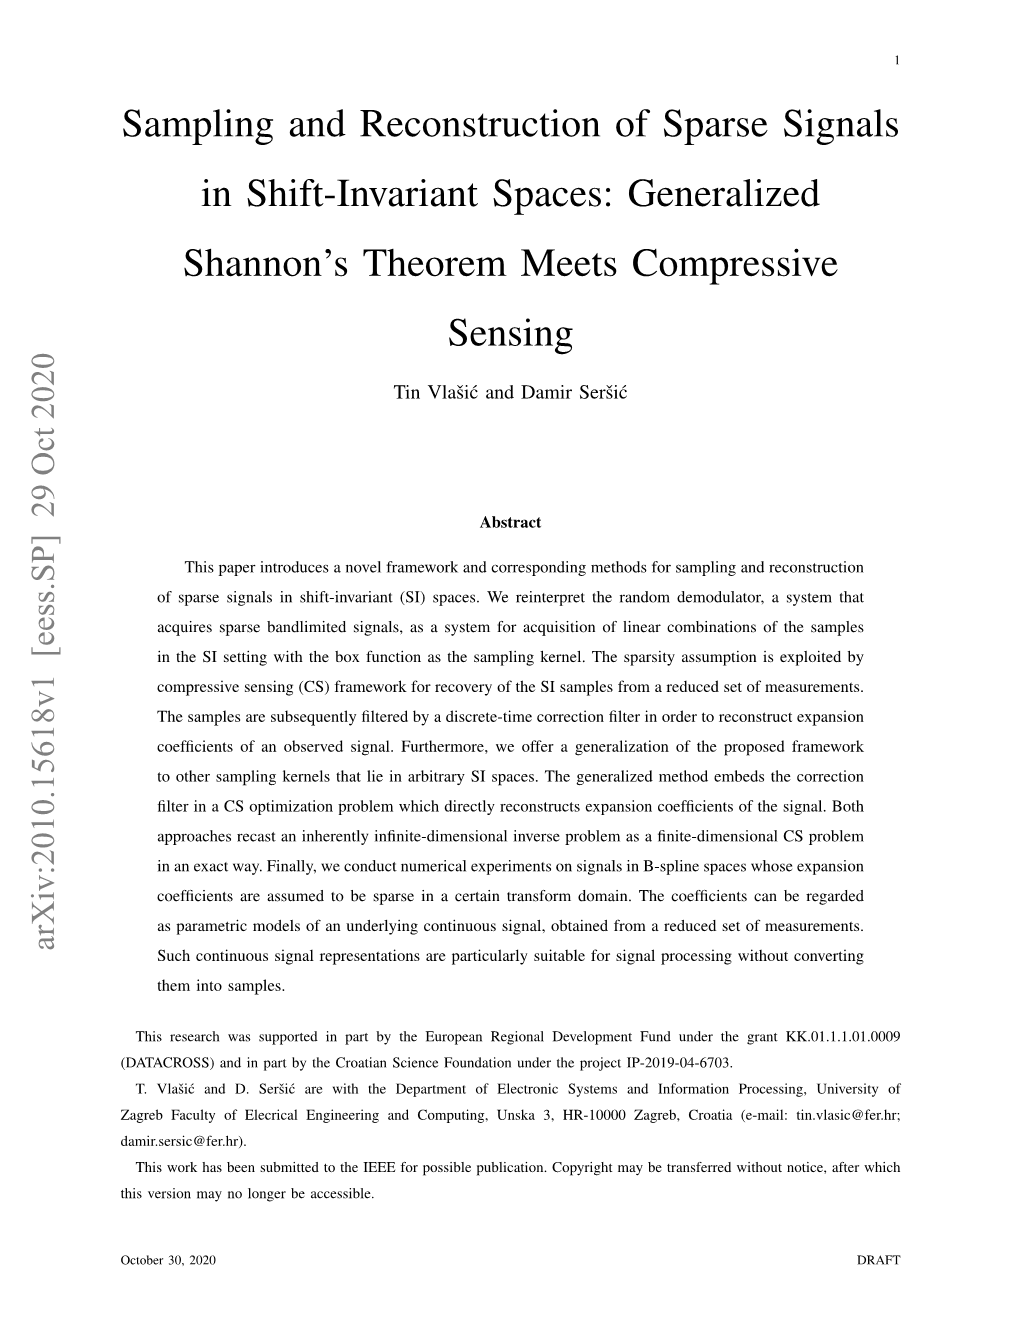 Sampling and Reconstruction of Sparse Signals in Shift-Invariant Spaces: Generalized Shannon’S Theorem Meets Compressive Sensing